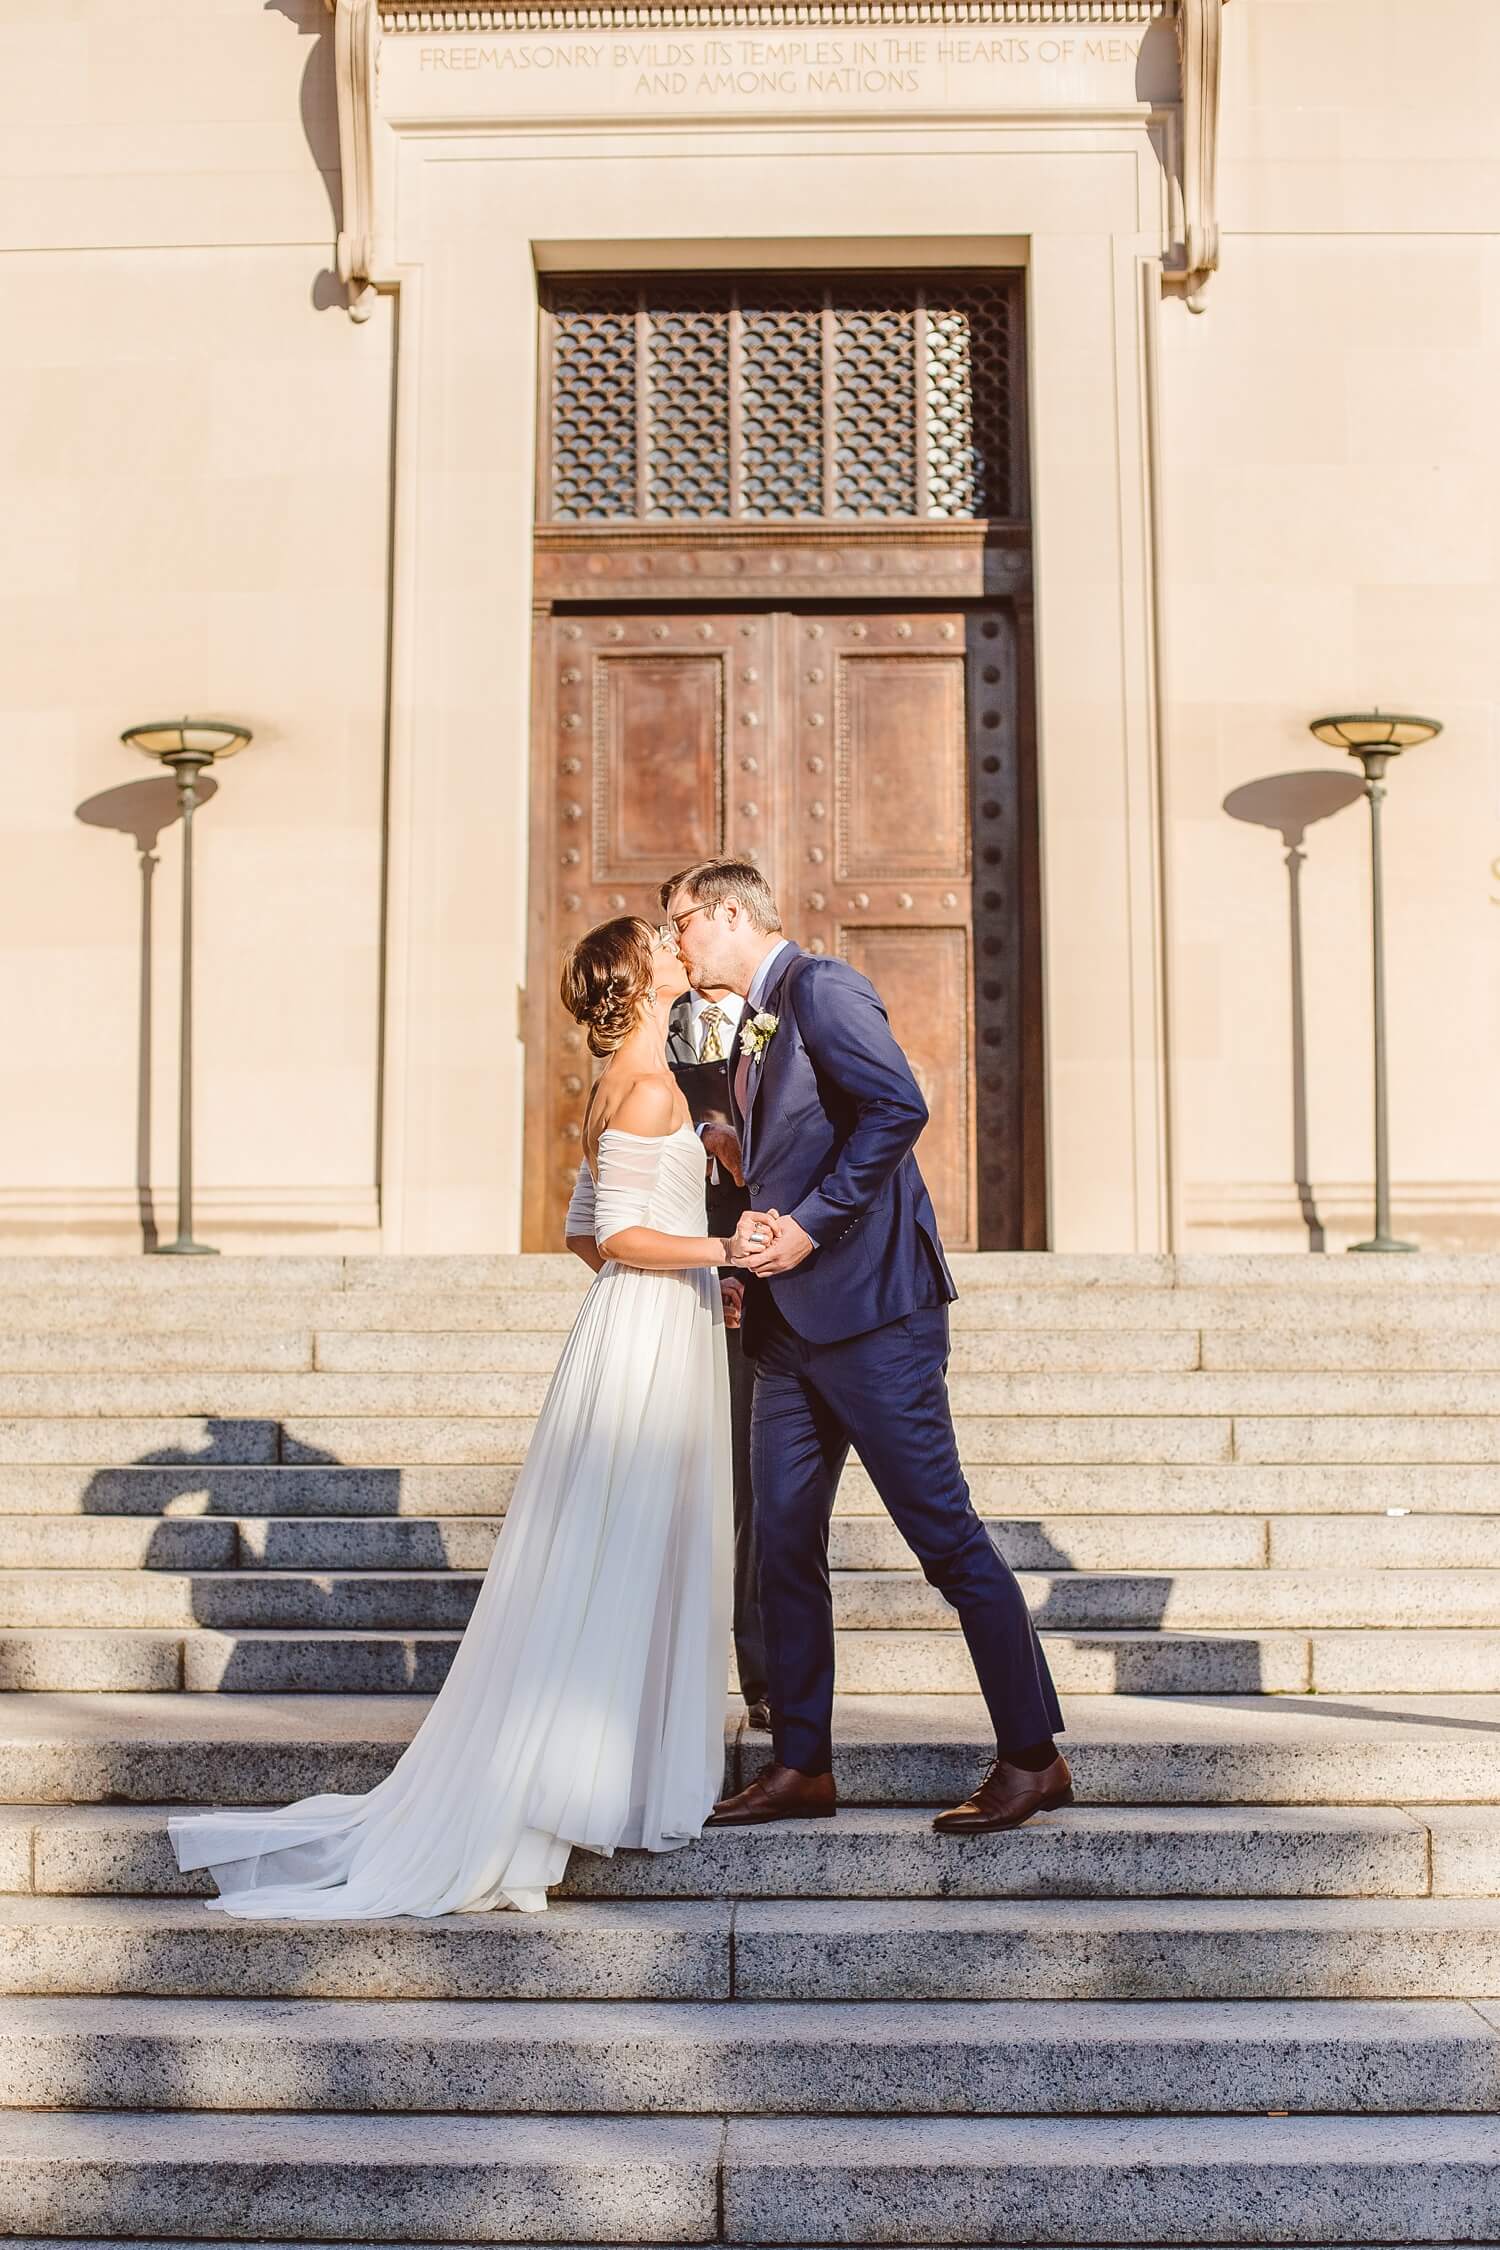 Bride and groom kissing at end of wedding ceremony in Washington DC | Brooke Michelle Photography